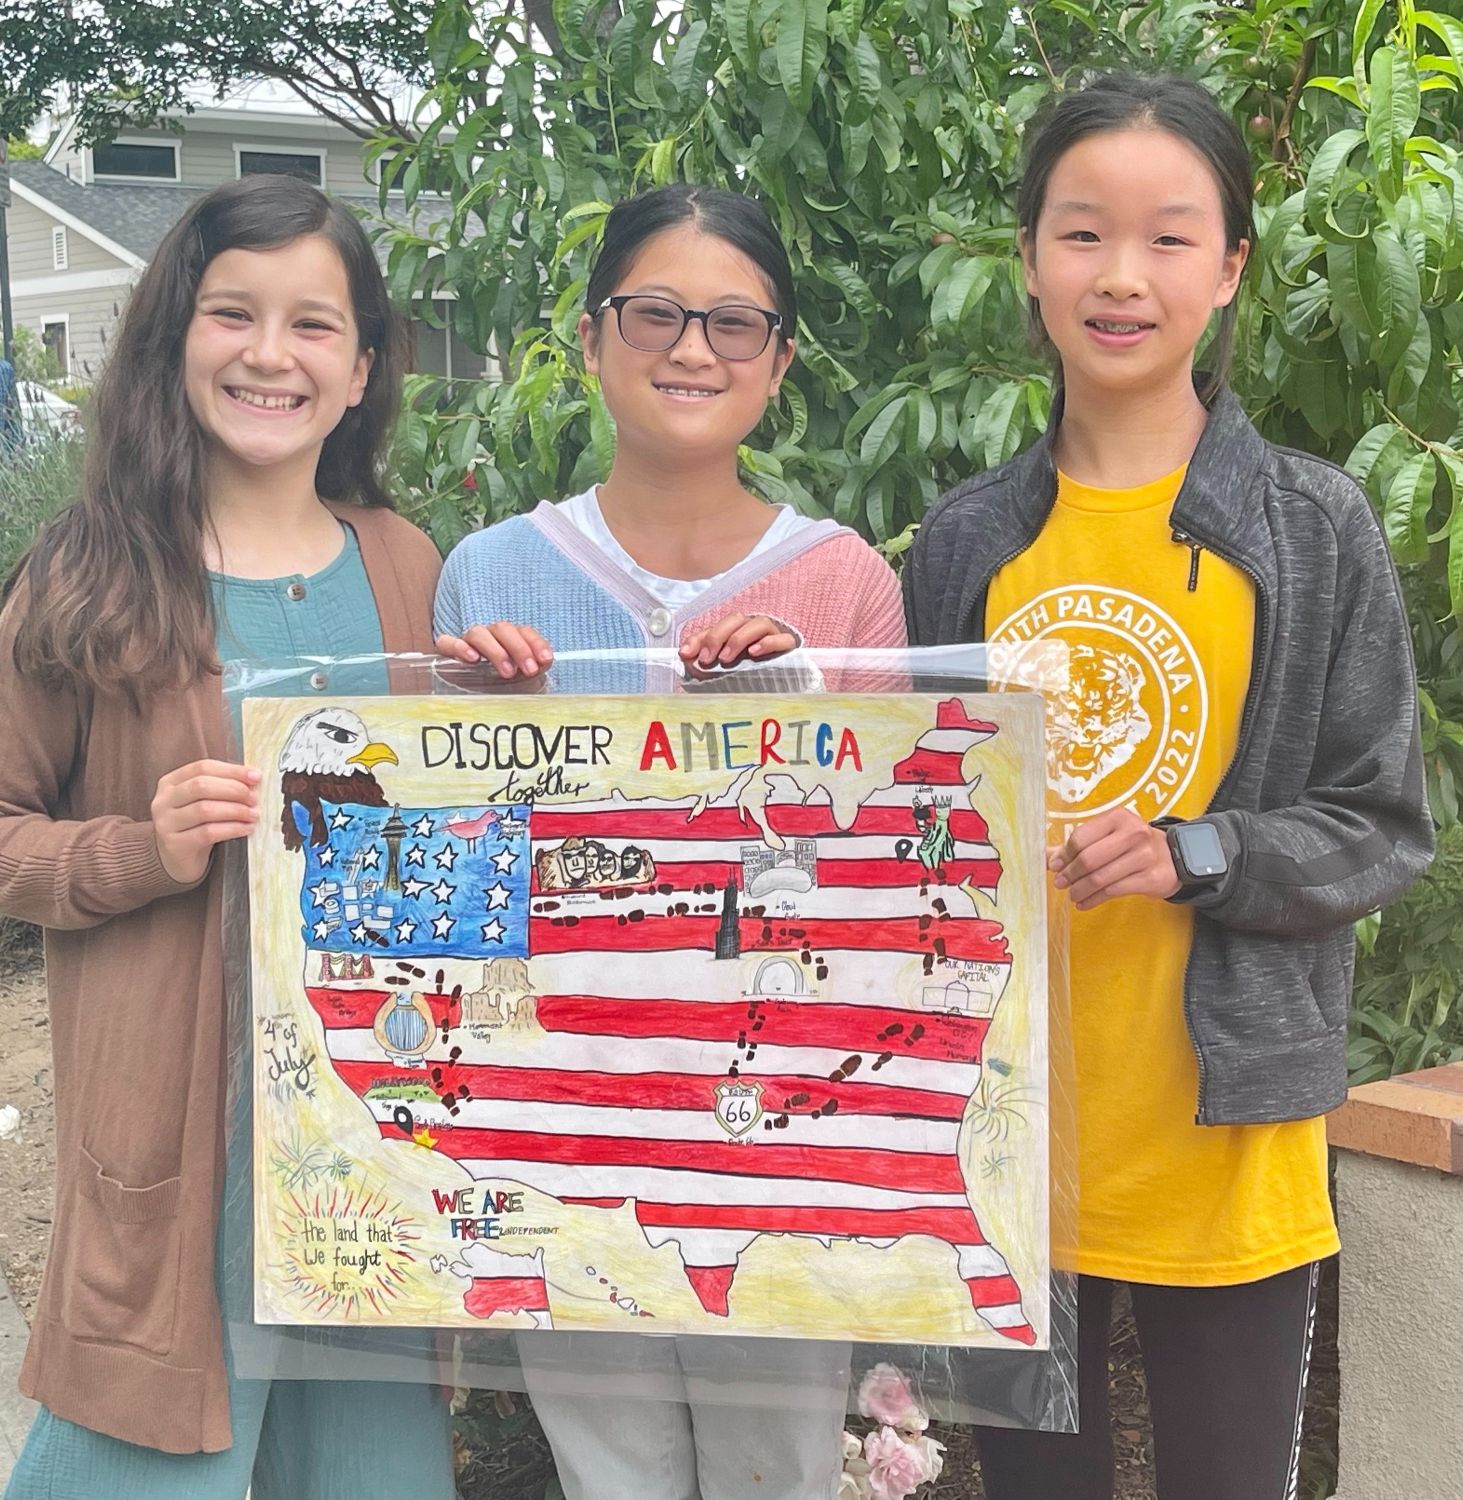 PHOTO: SPARC | The South Pasadenan | 4th of July poster contest finalists Marisola Barba, Seraph Wu, and Cleo Zhang with their entry "Discover America Together".